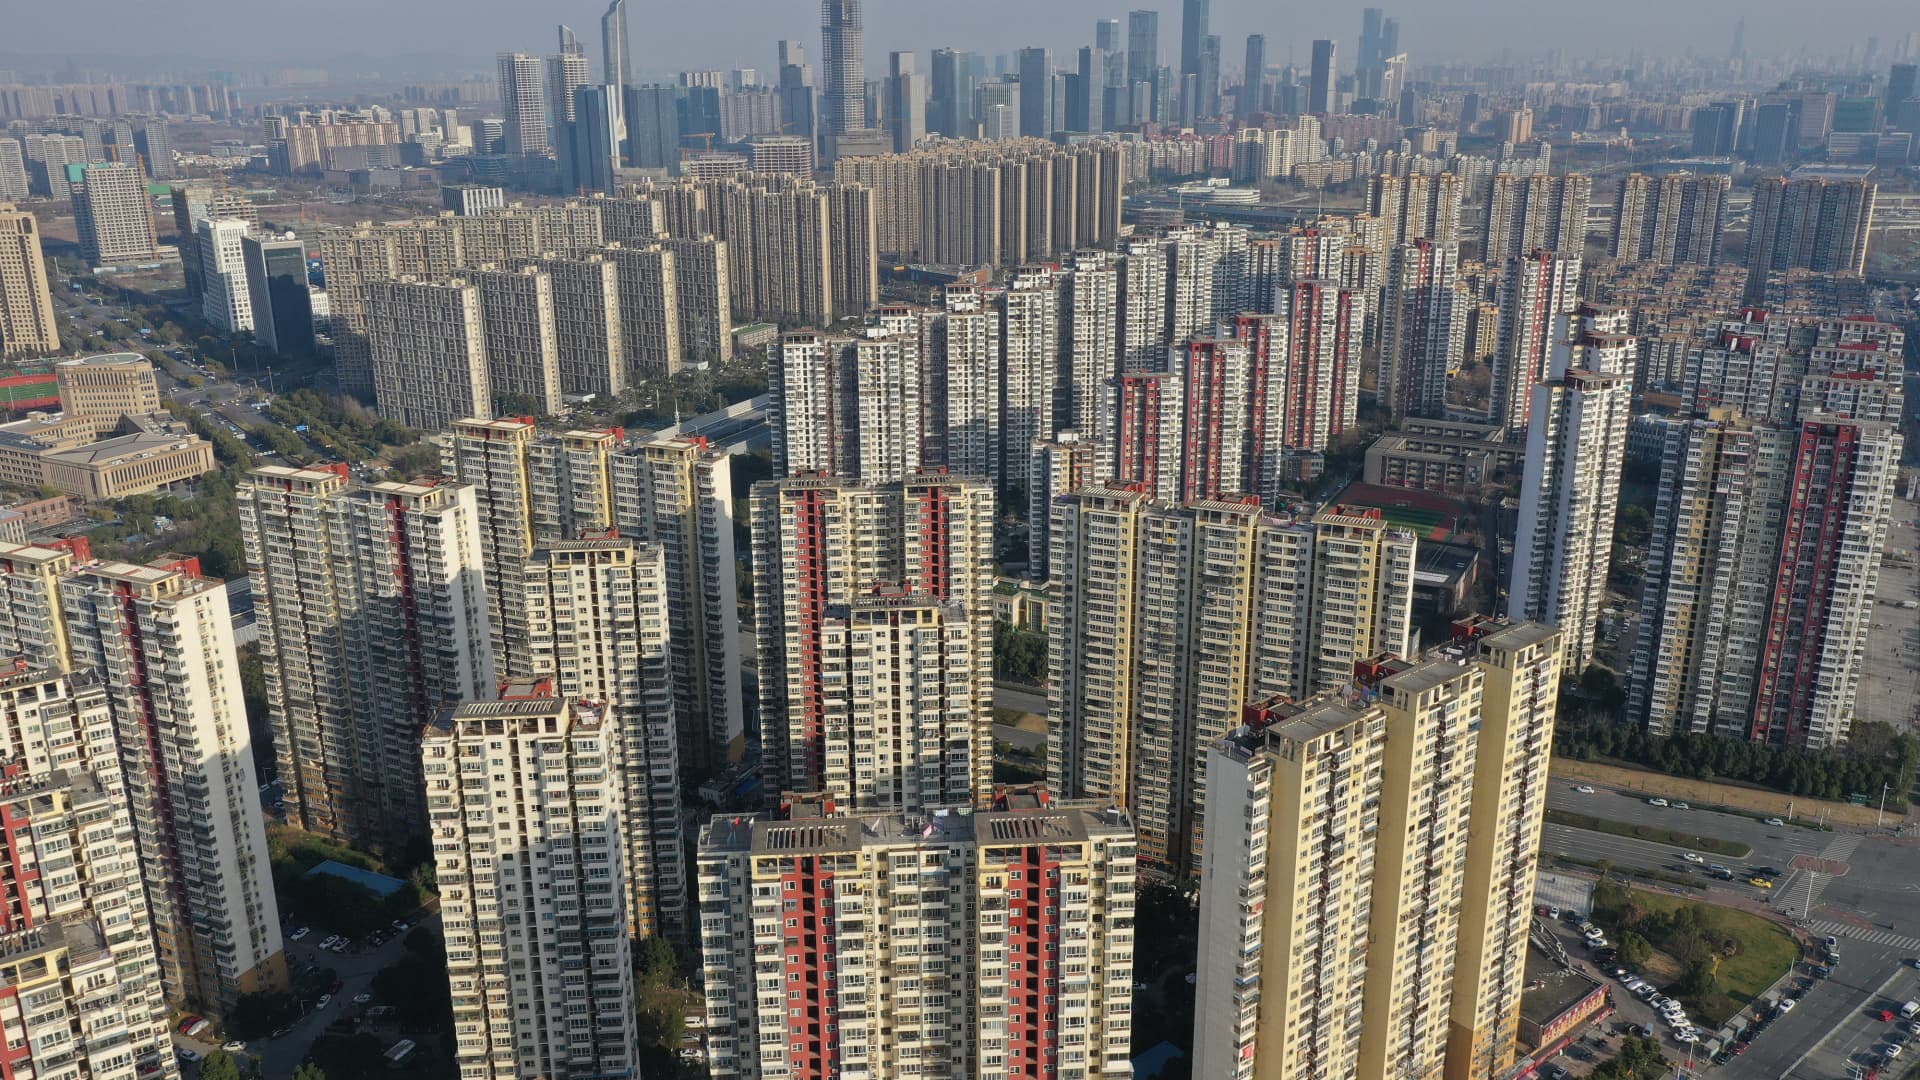 China's real estate crisis isn't over yet, IMF says